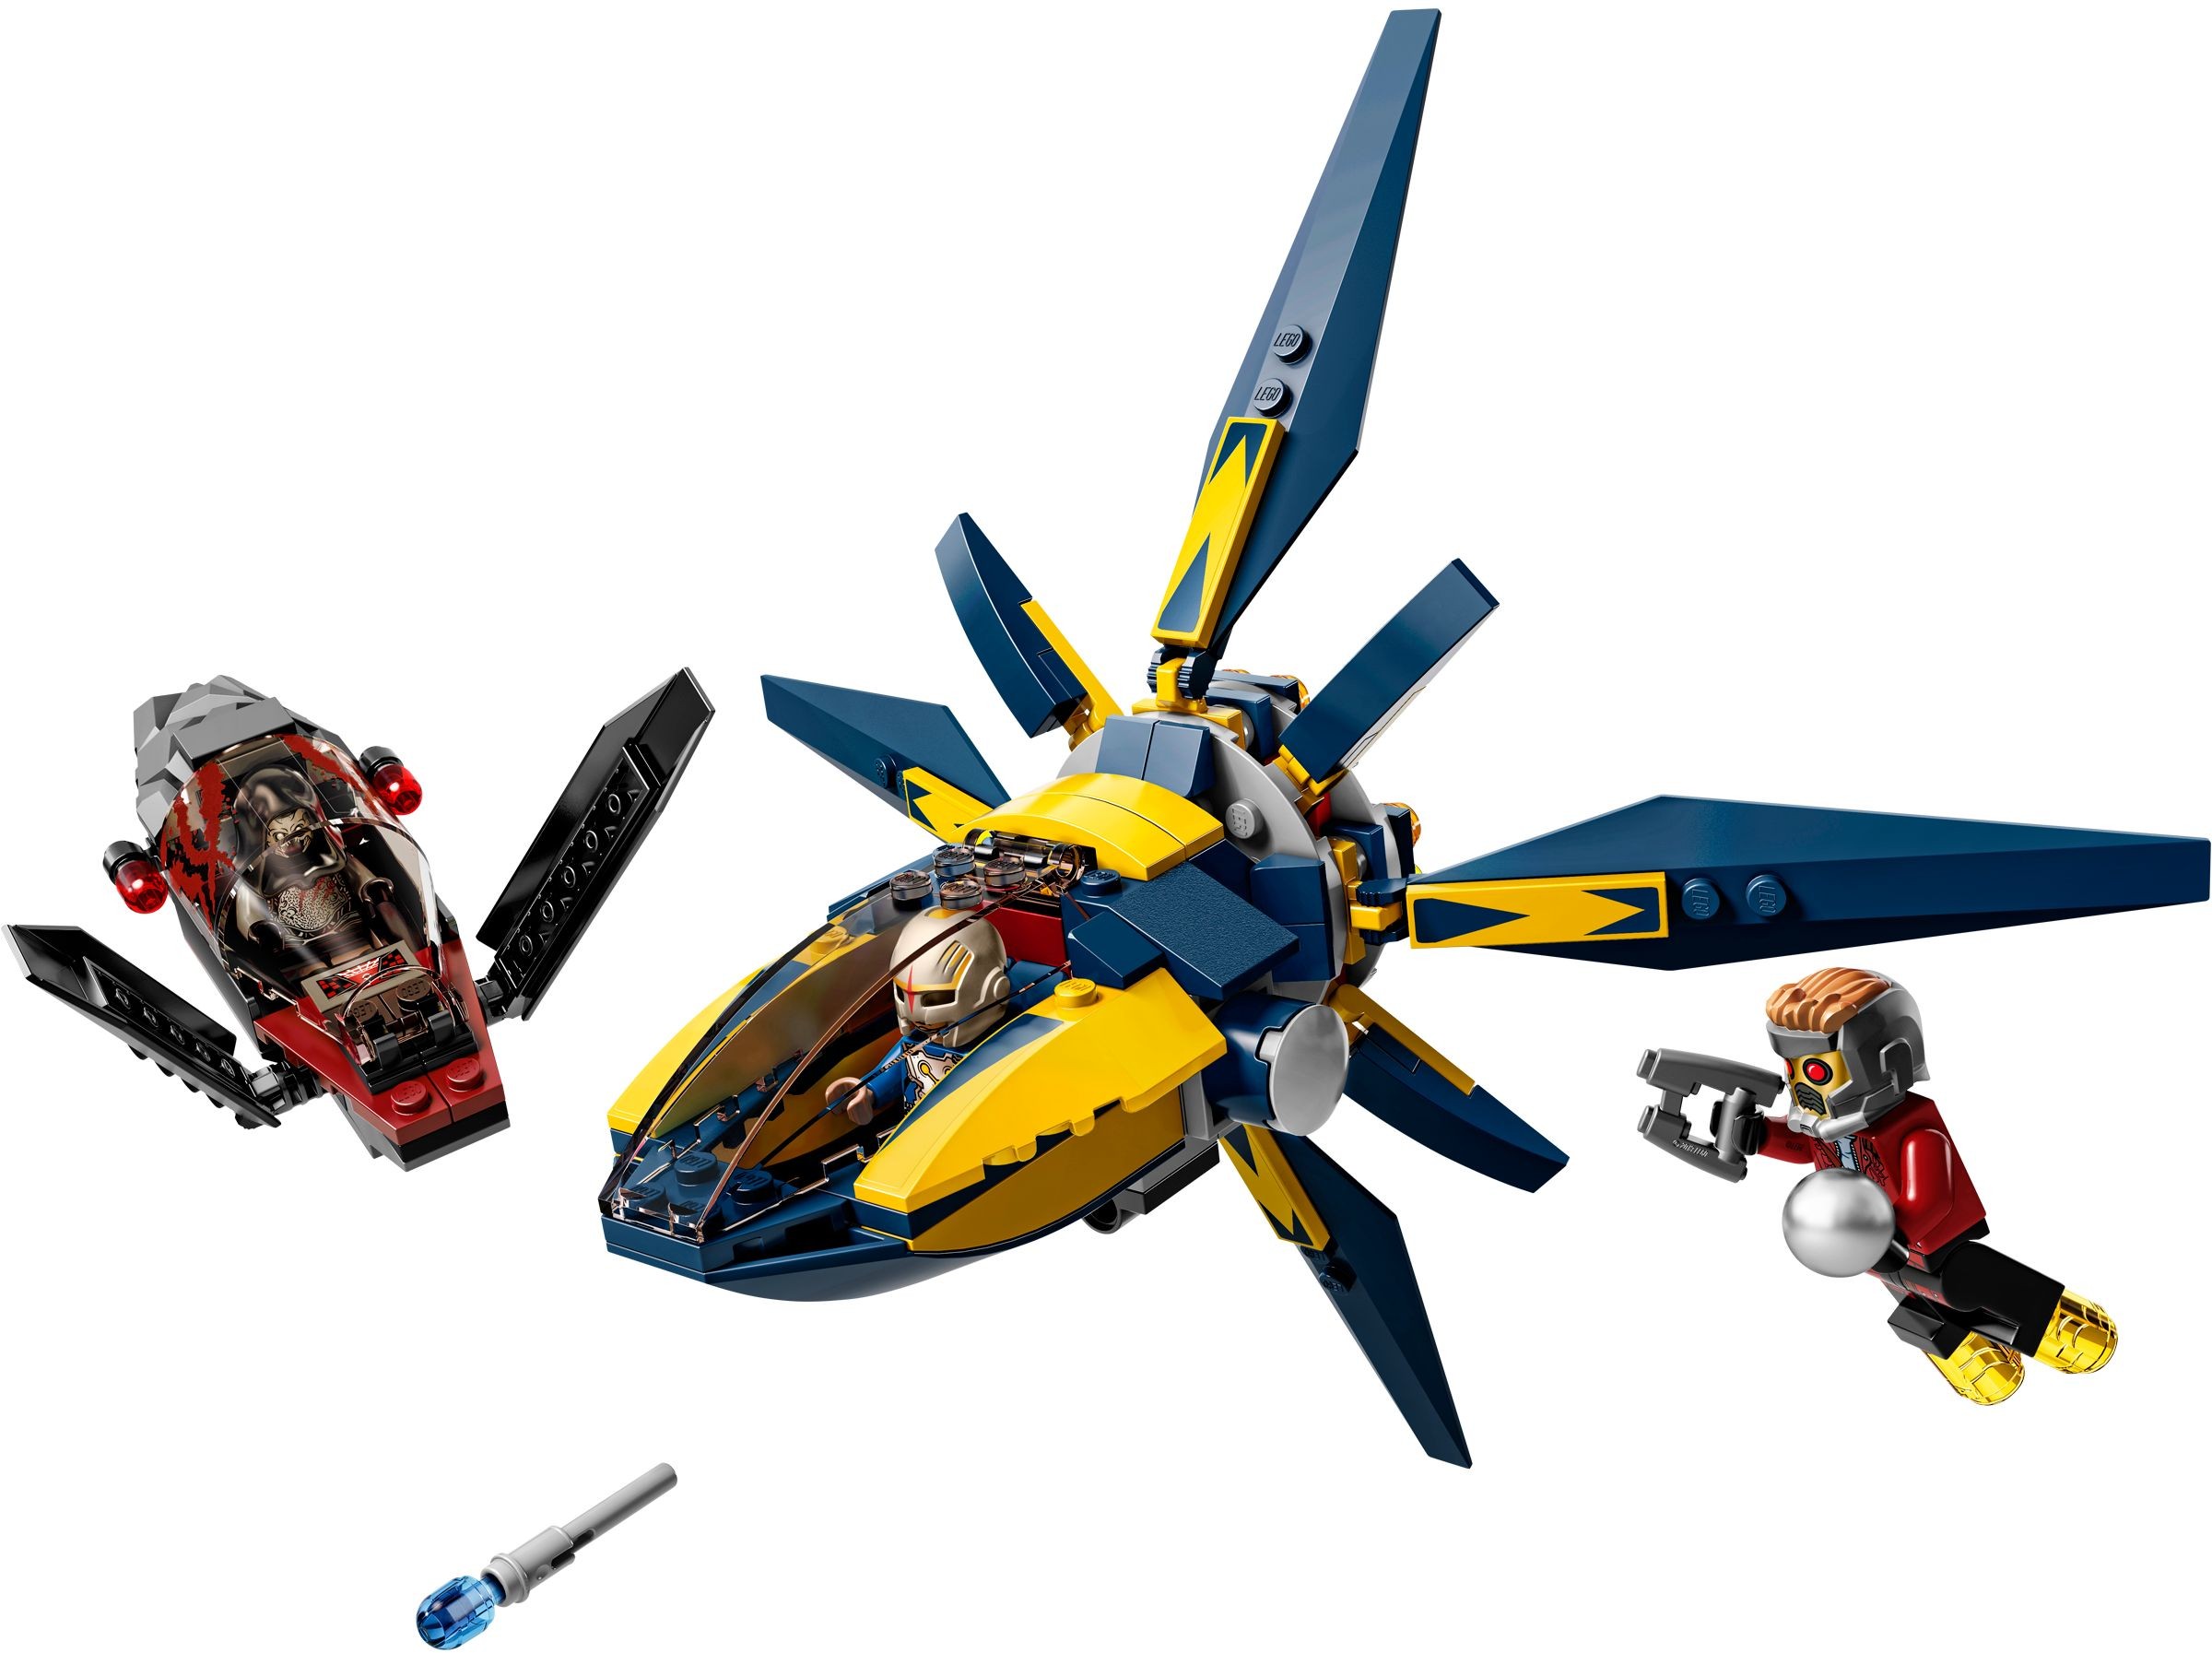 lego guardians of the galaxy